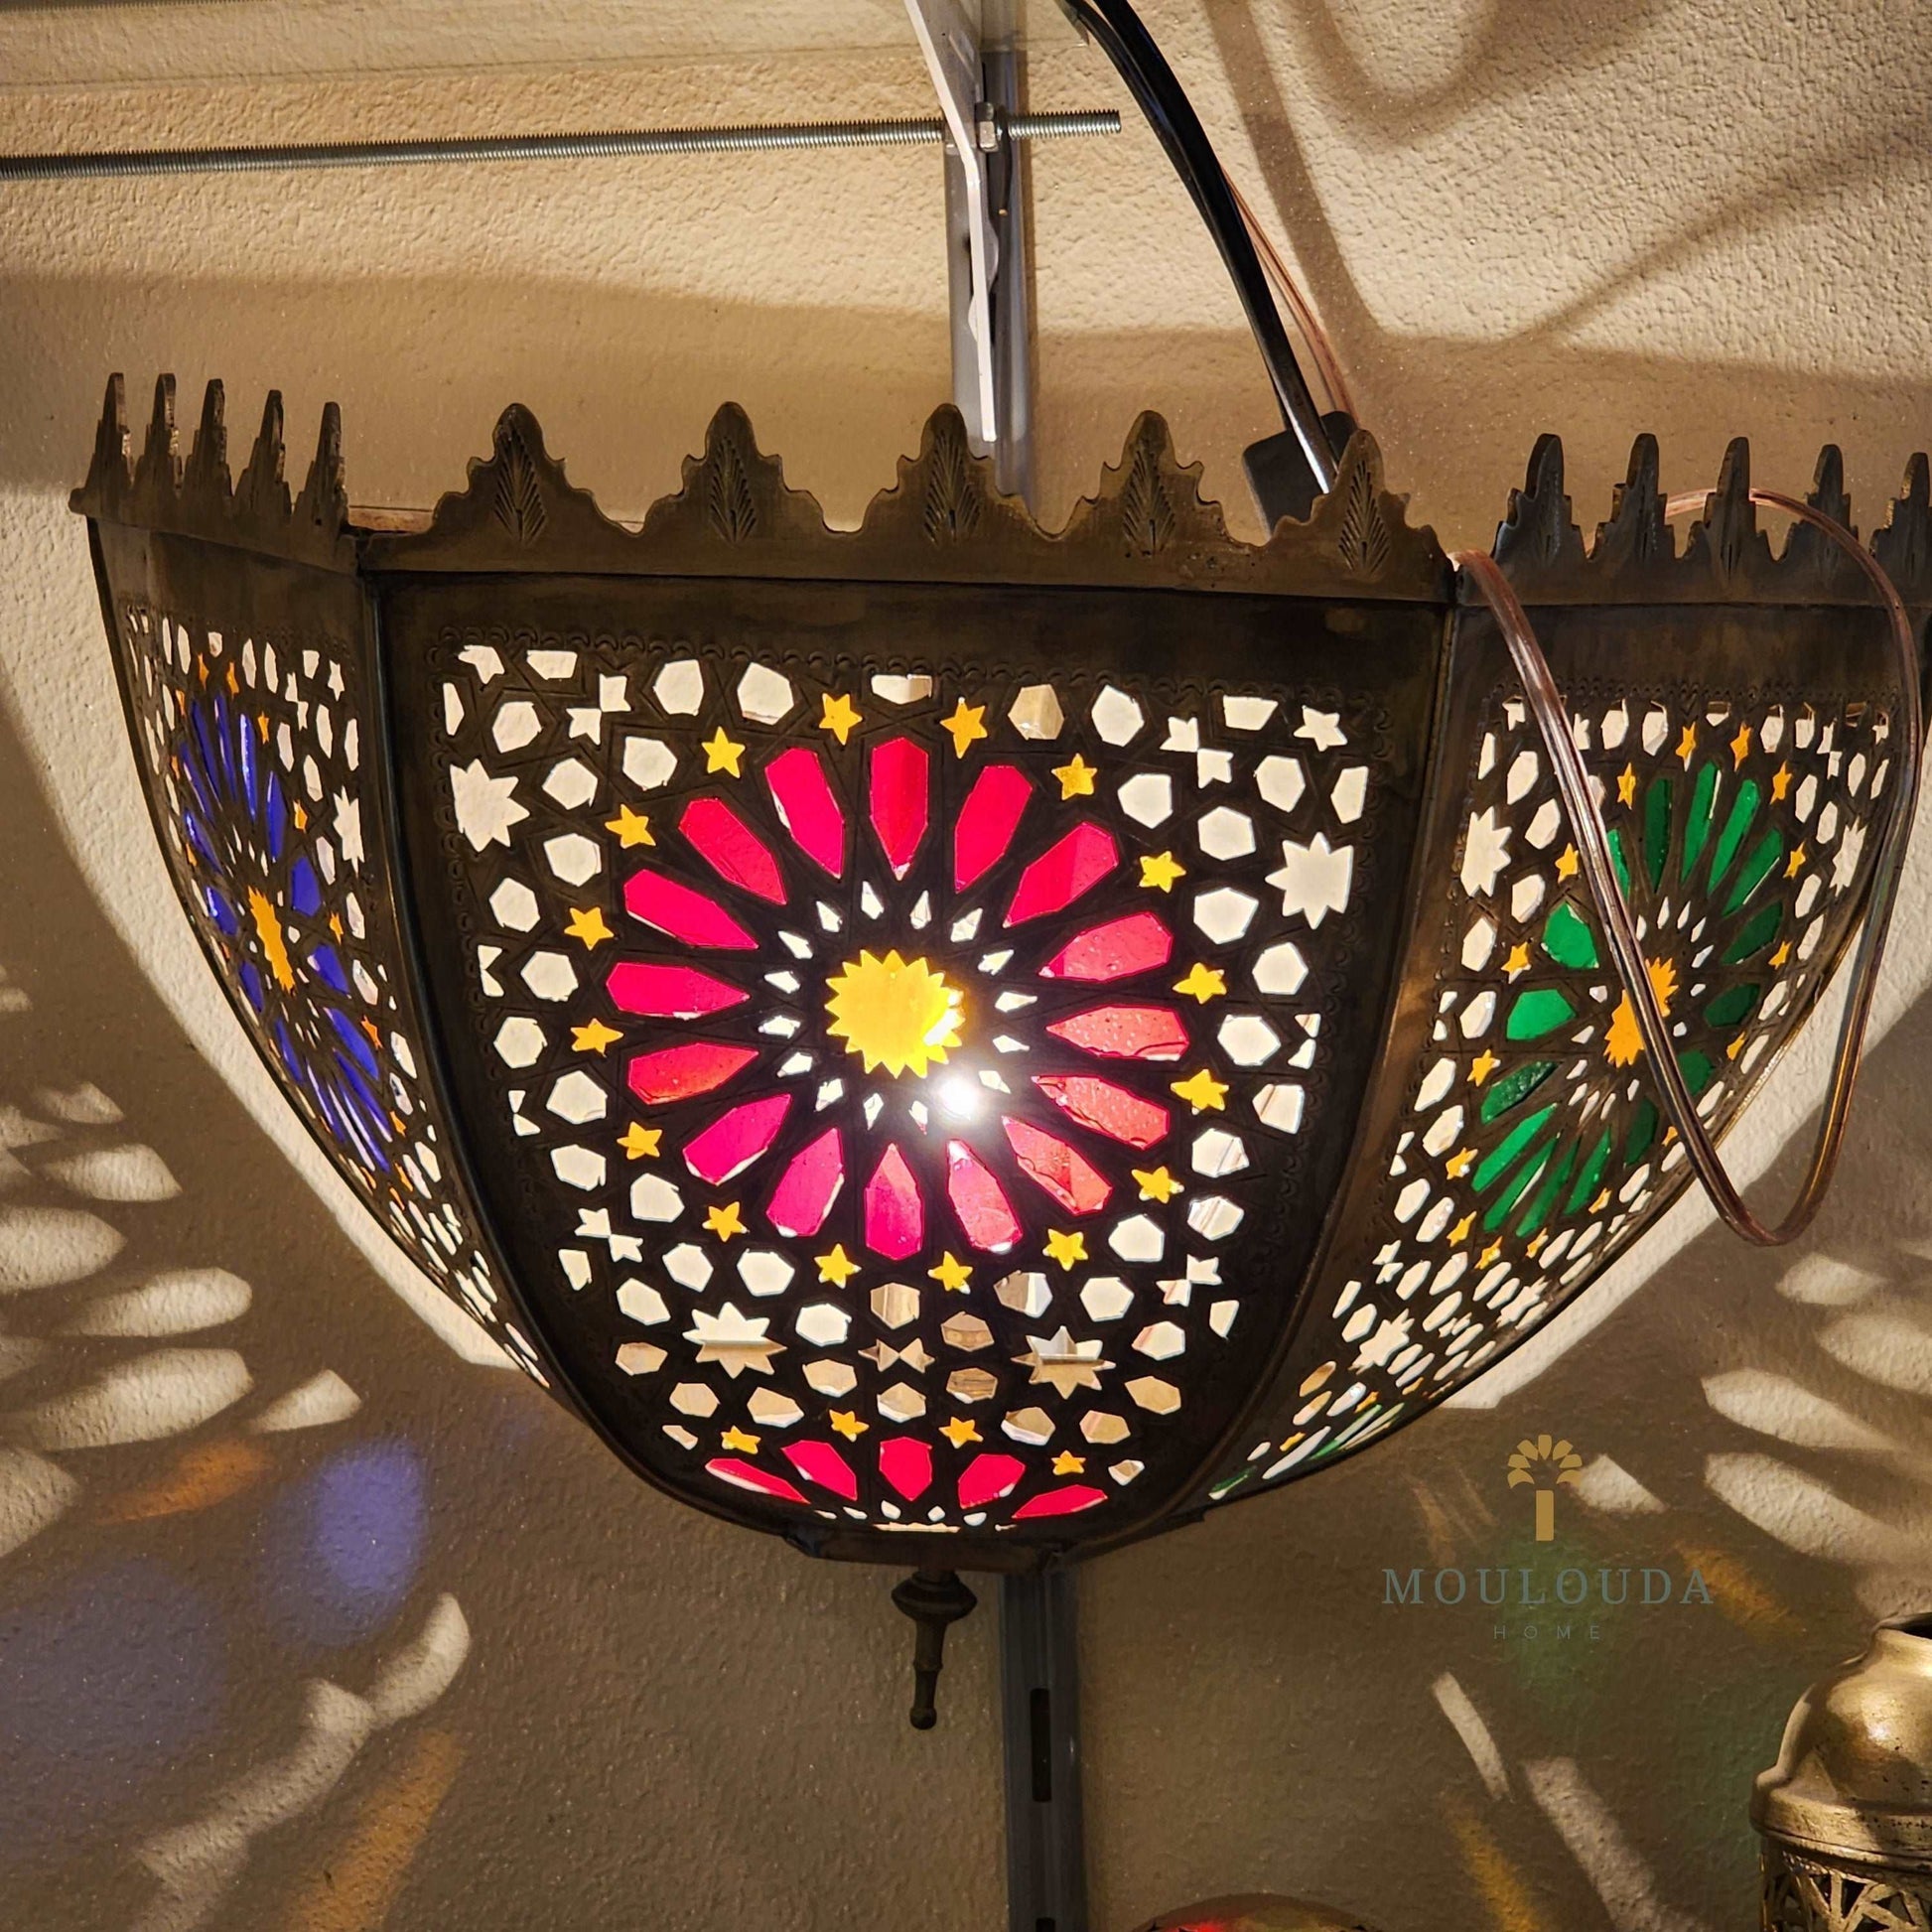 Create an Exotic Oasis with a Handmade Moroccan Lamp - Beautiful Pendant Lighting for Your Home - Mouloudahome